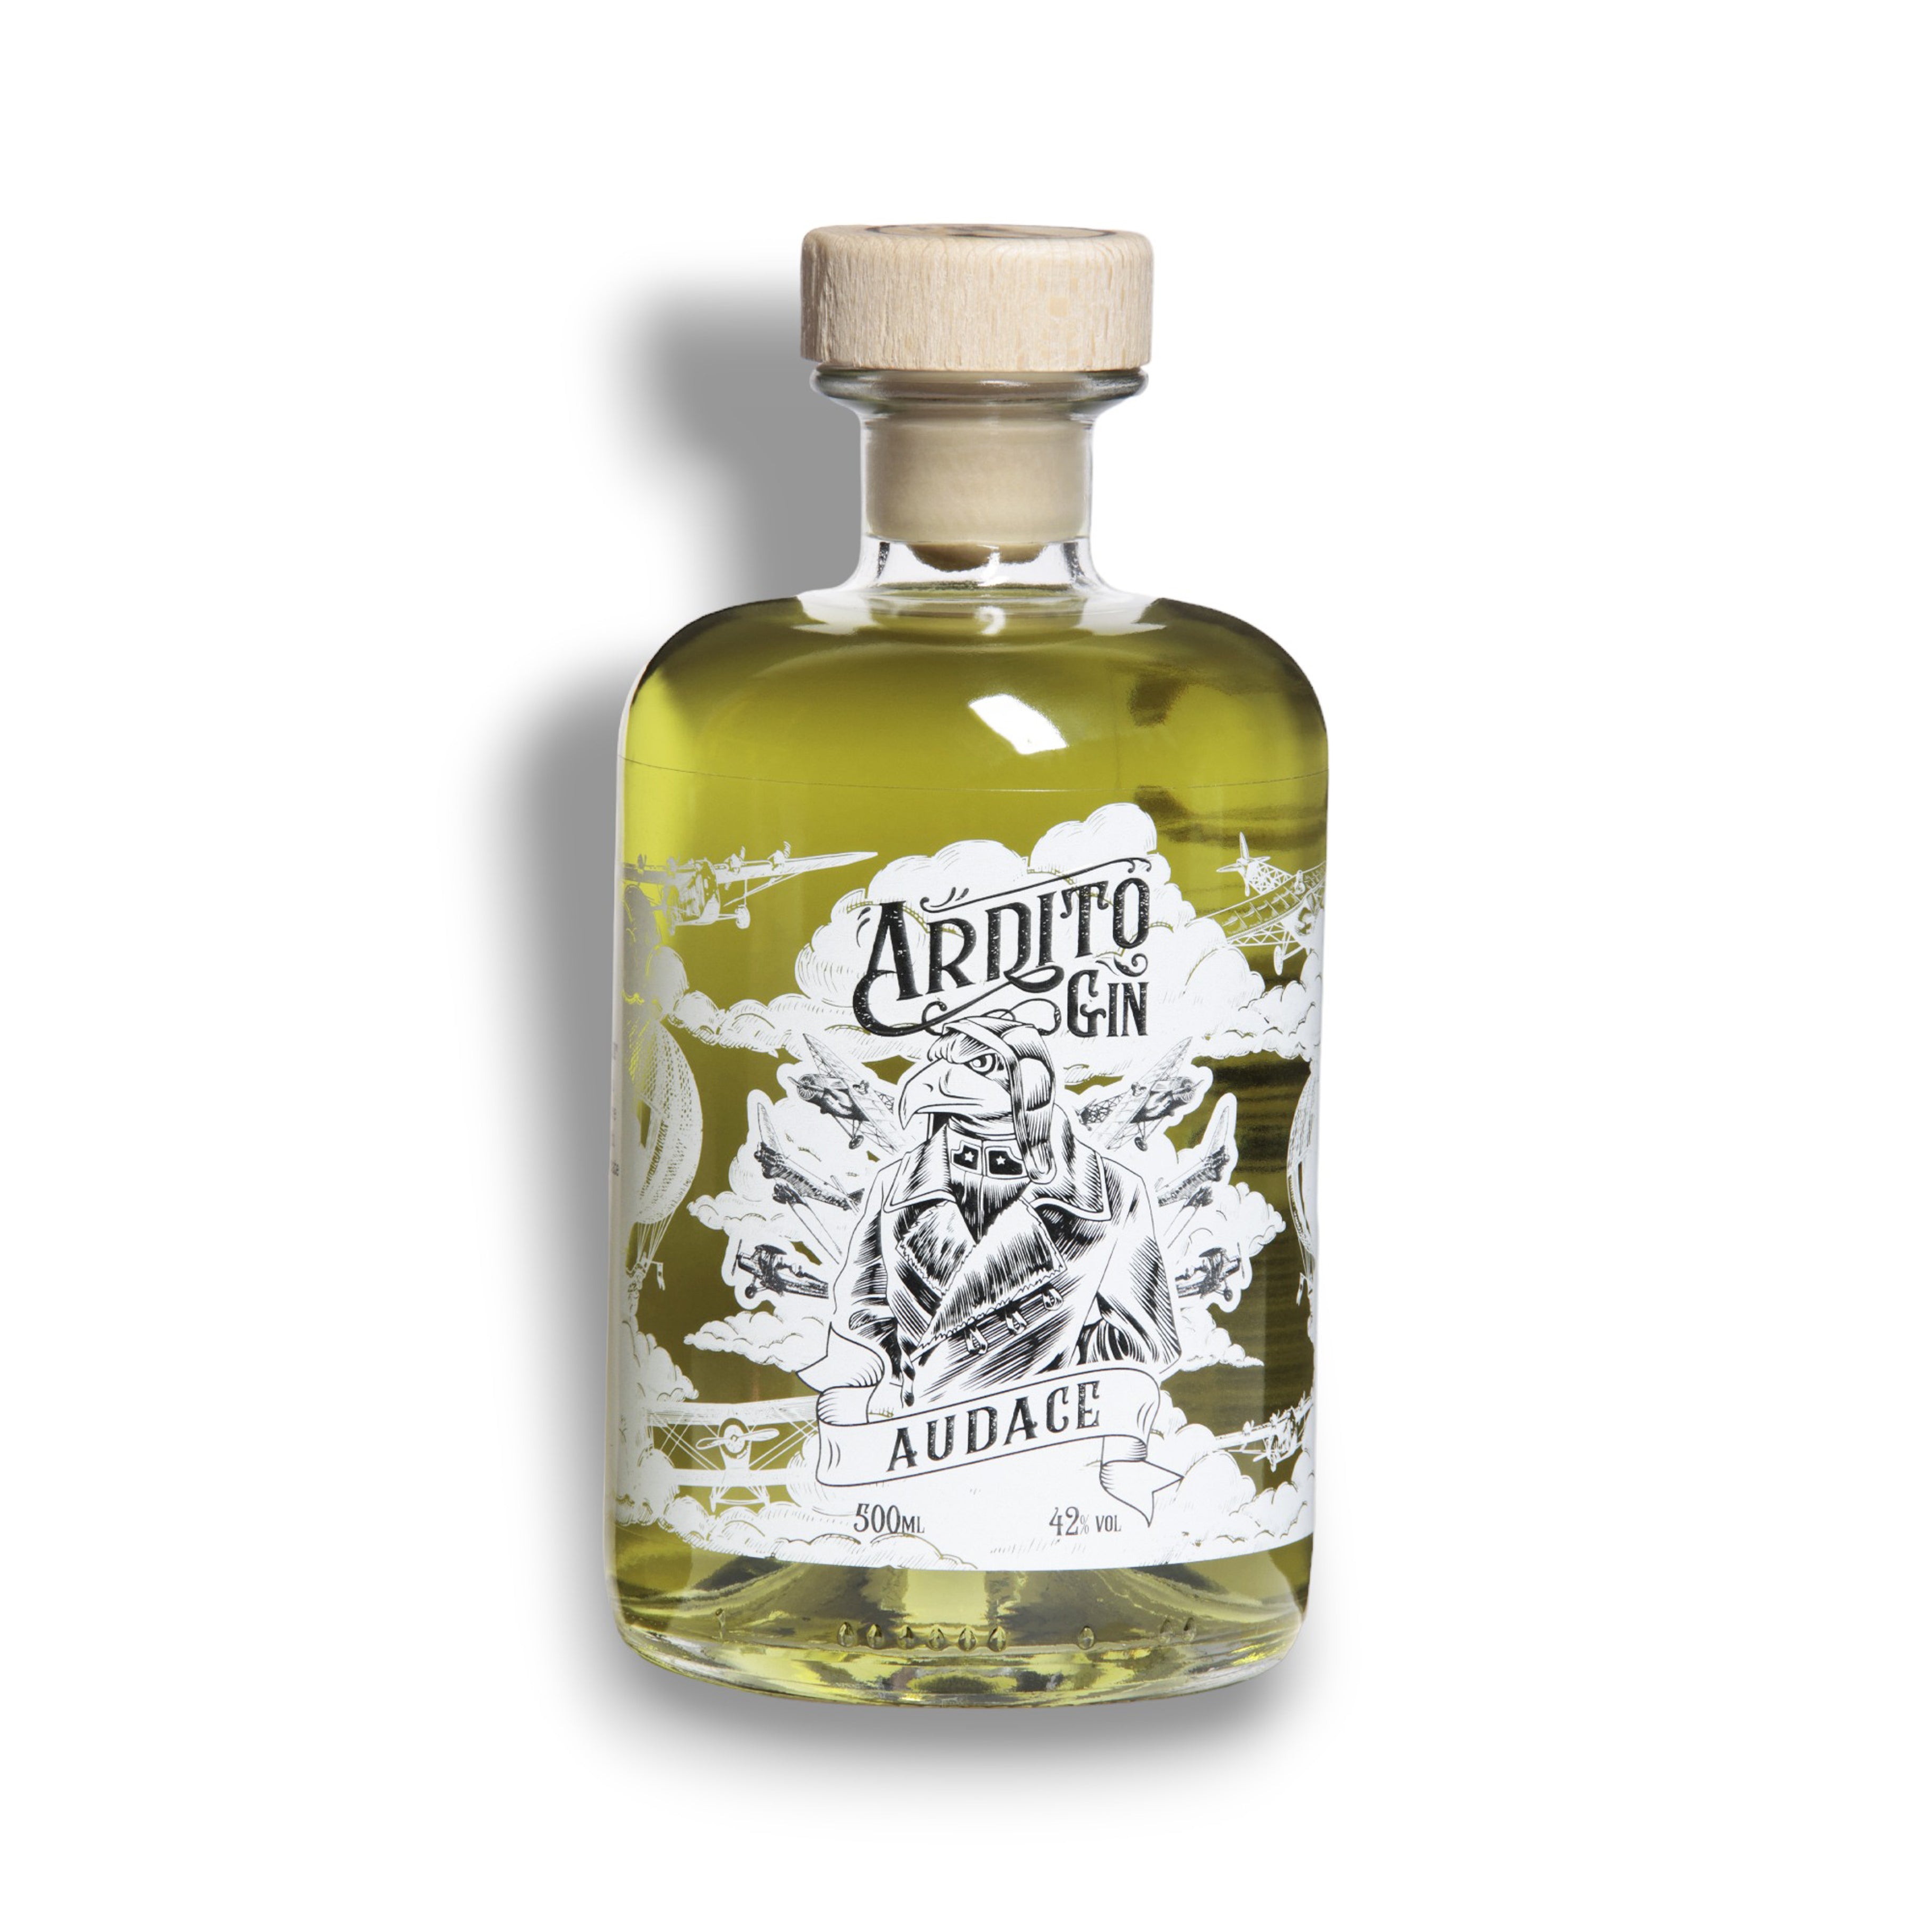 1. AUDACE - DRY GIN